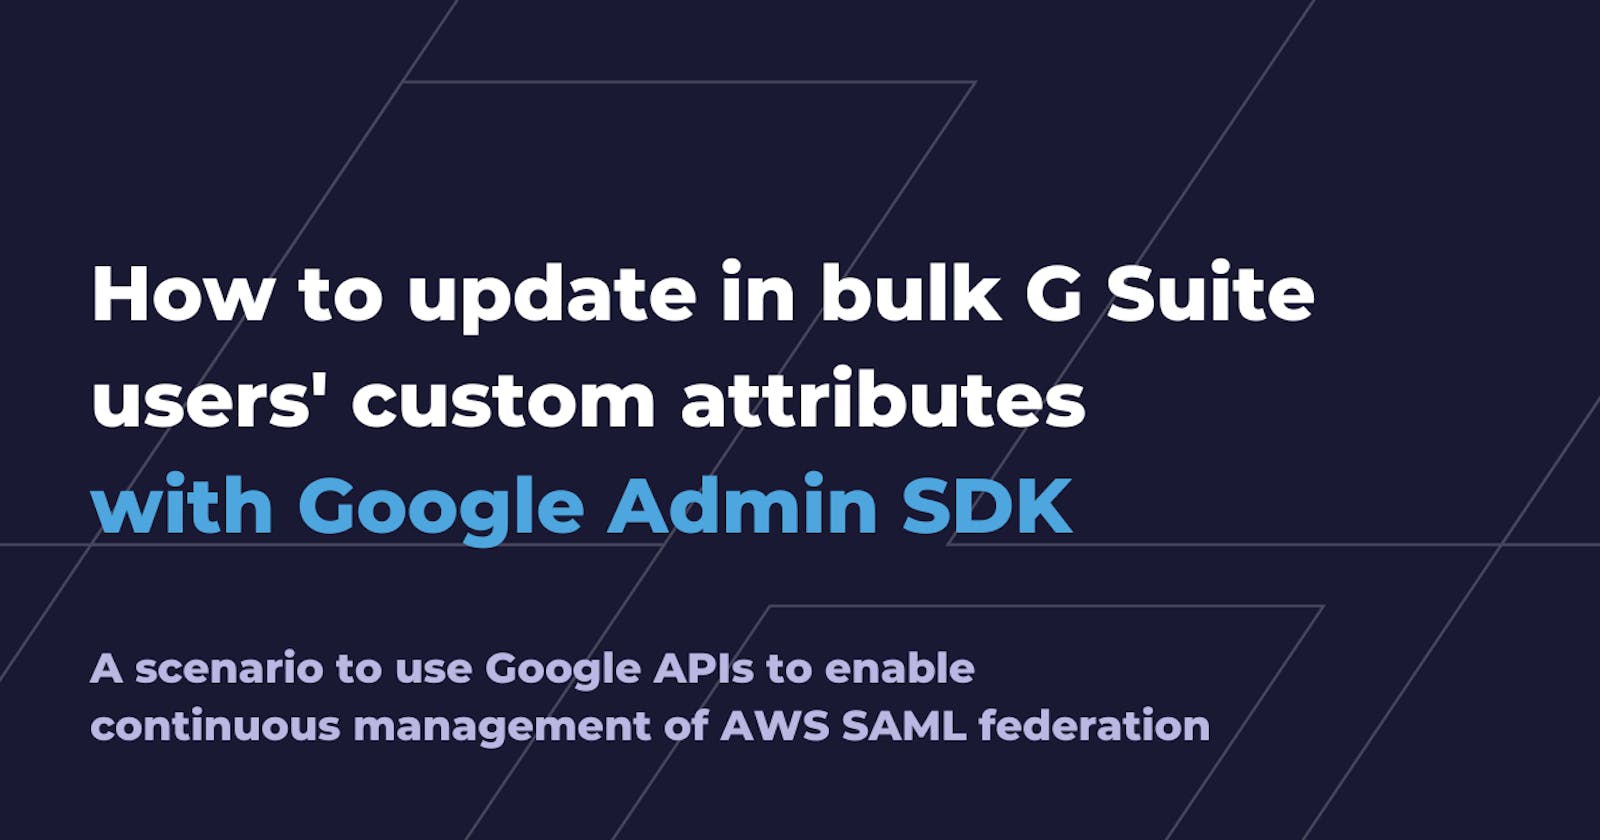 How to update in bulk G Suite users' custom attributes with Google Admin SDK